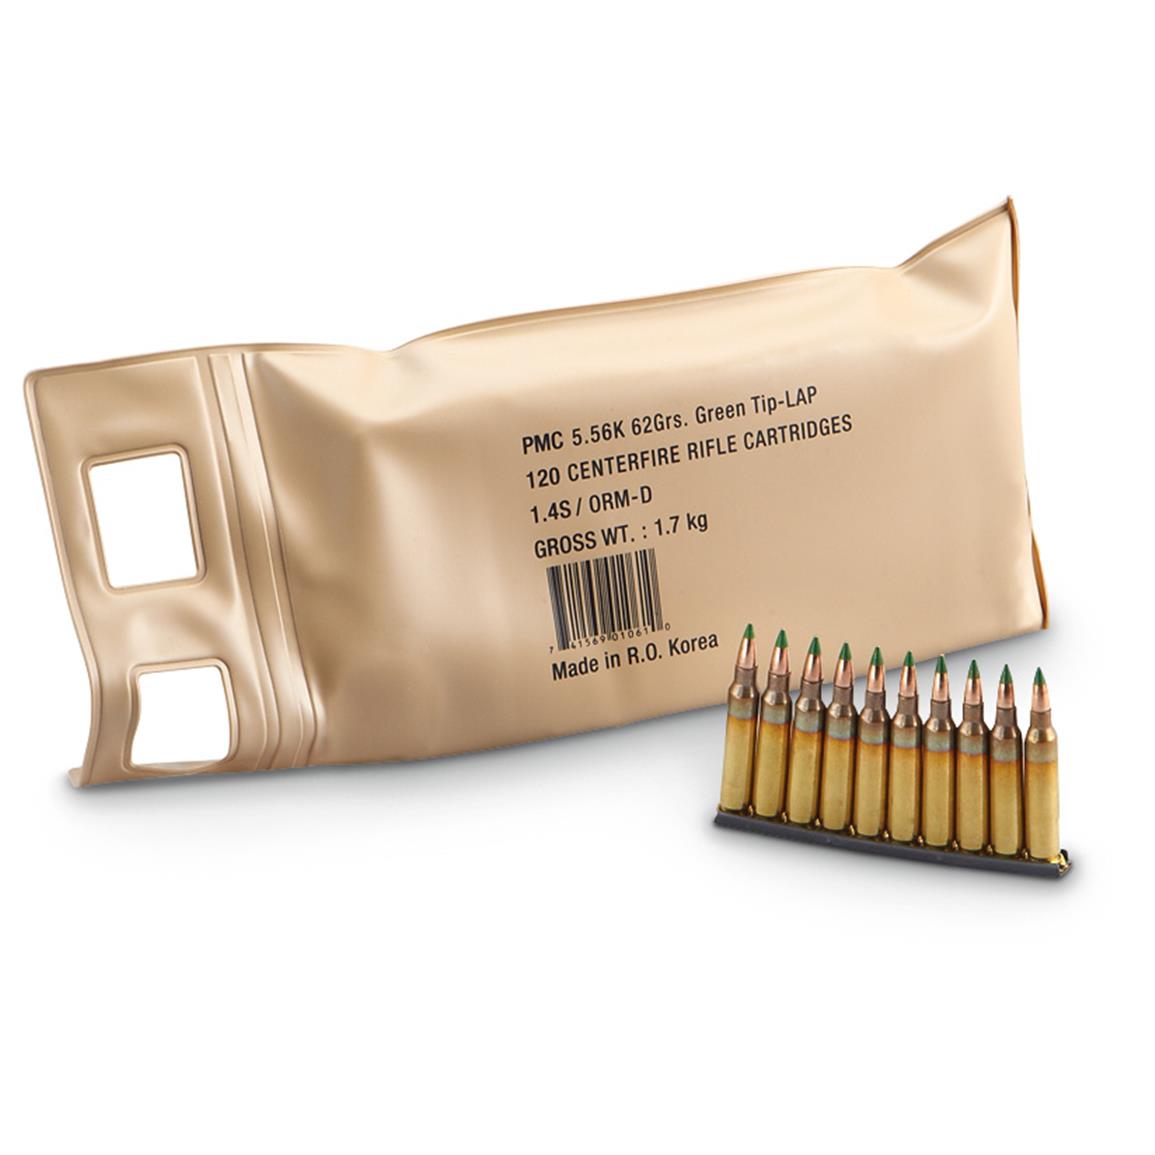 PMC X-Tac M855 Green Tip, 5.56x45mm NATO, FMJ-LAP, 62 Grain, 120 Rounds in a Battle Pack